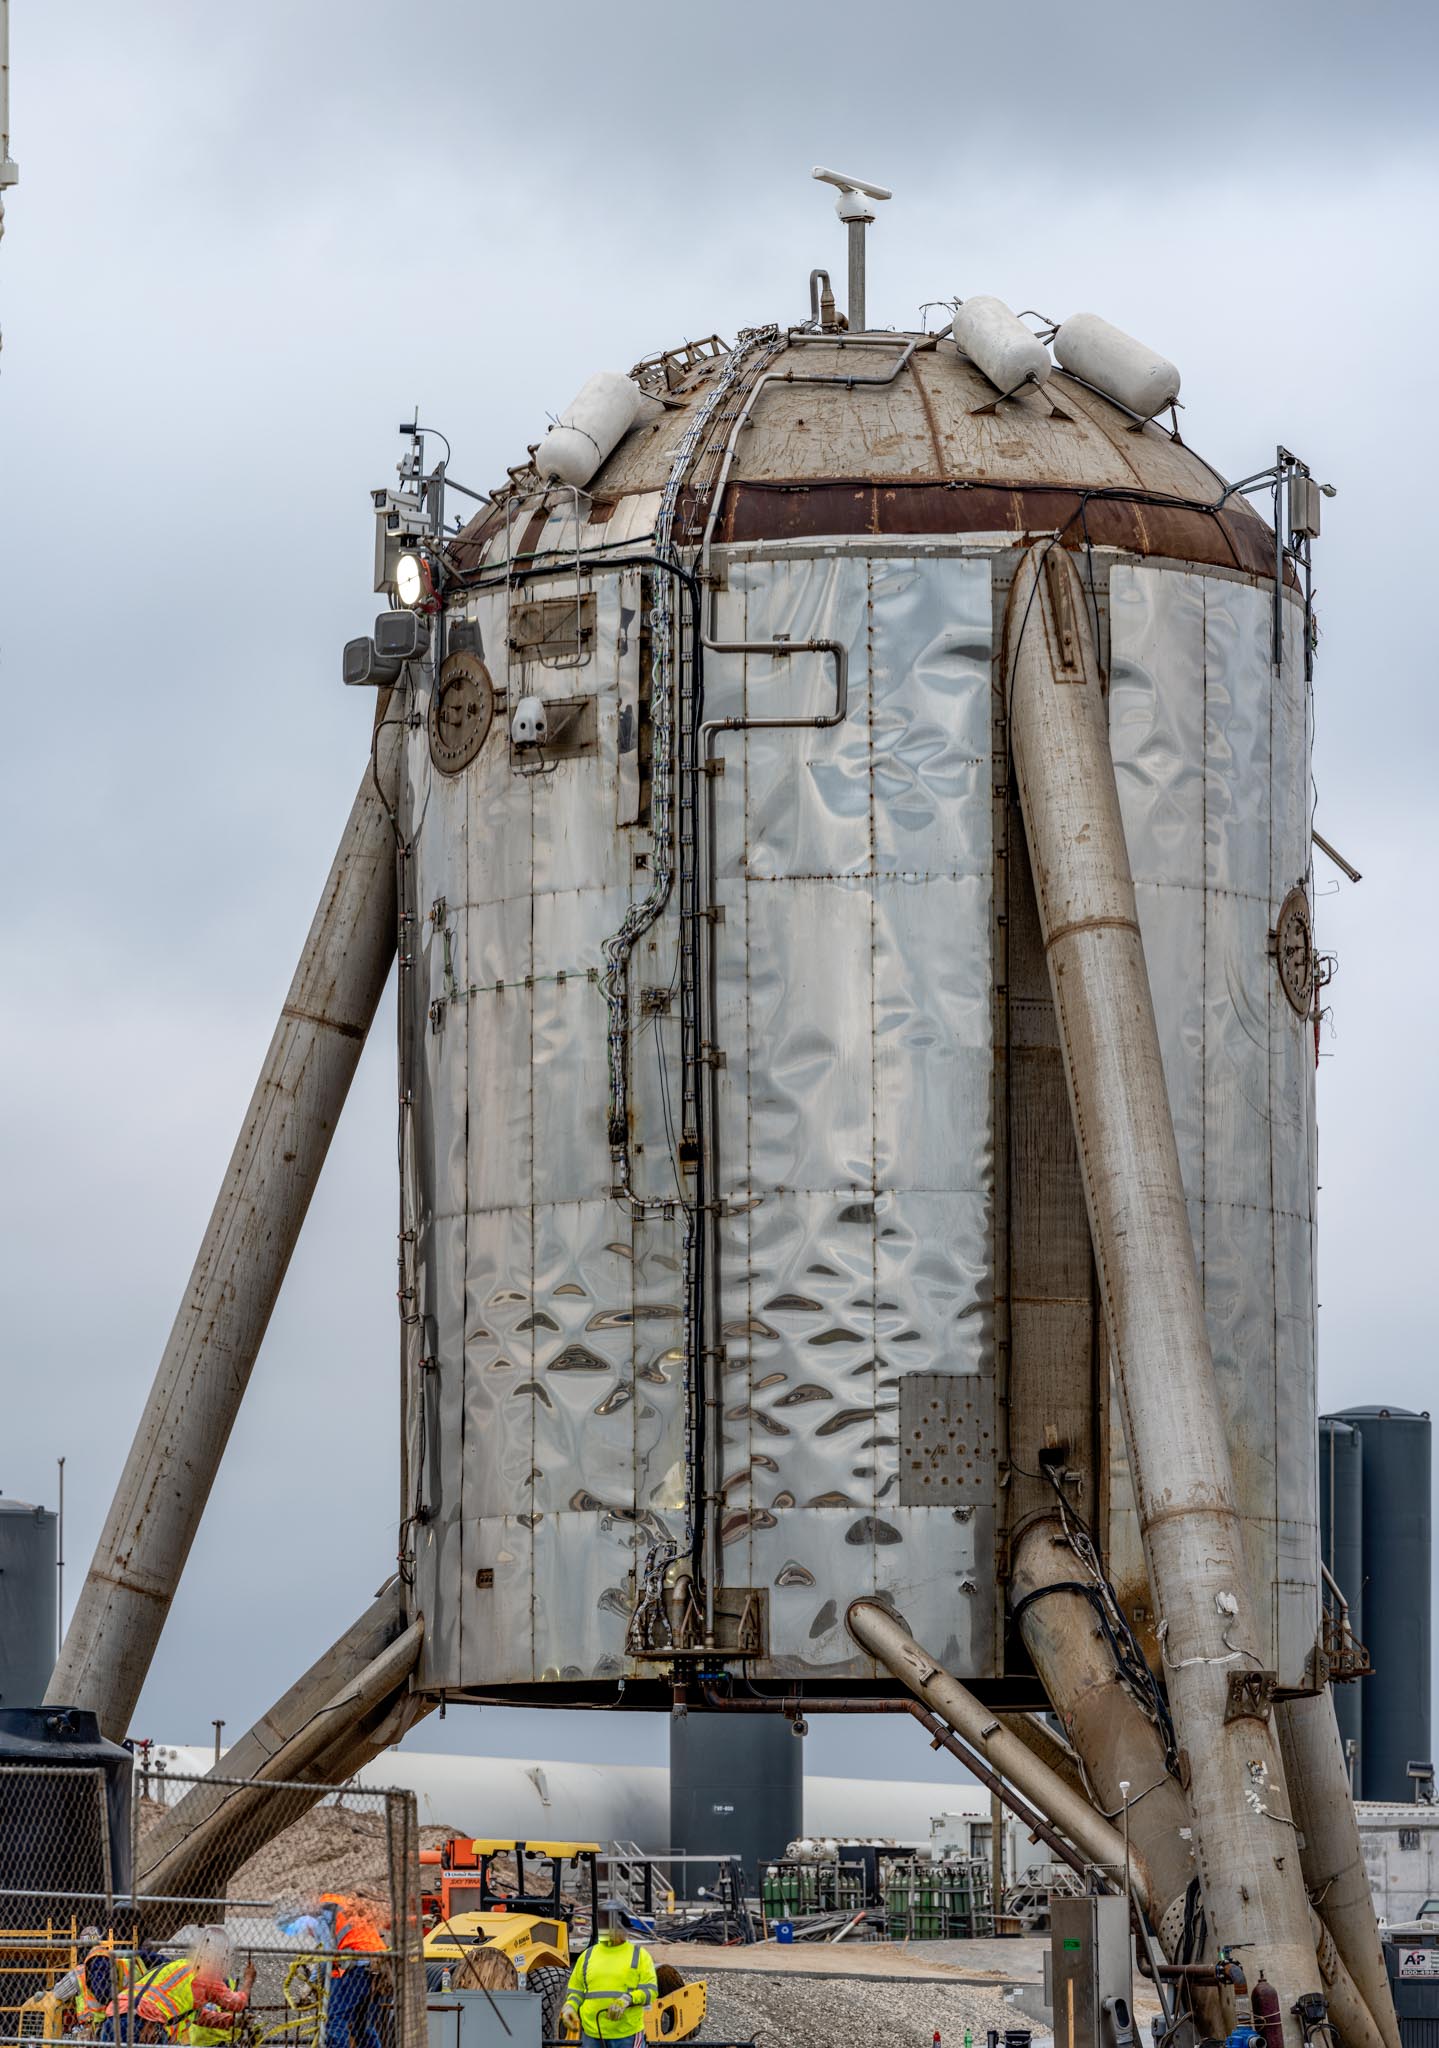 a large metal structure with multiple legs